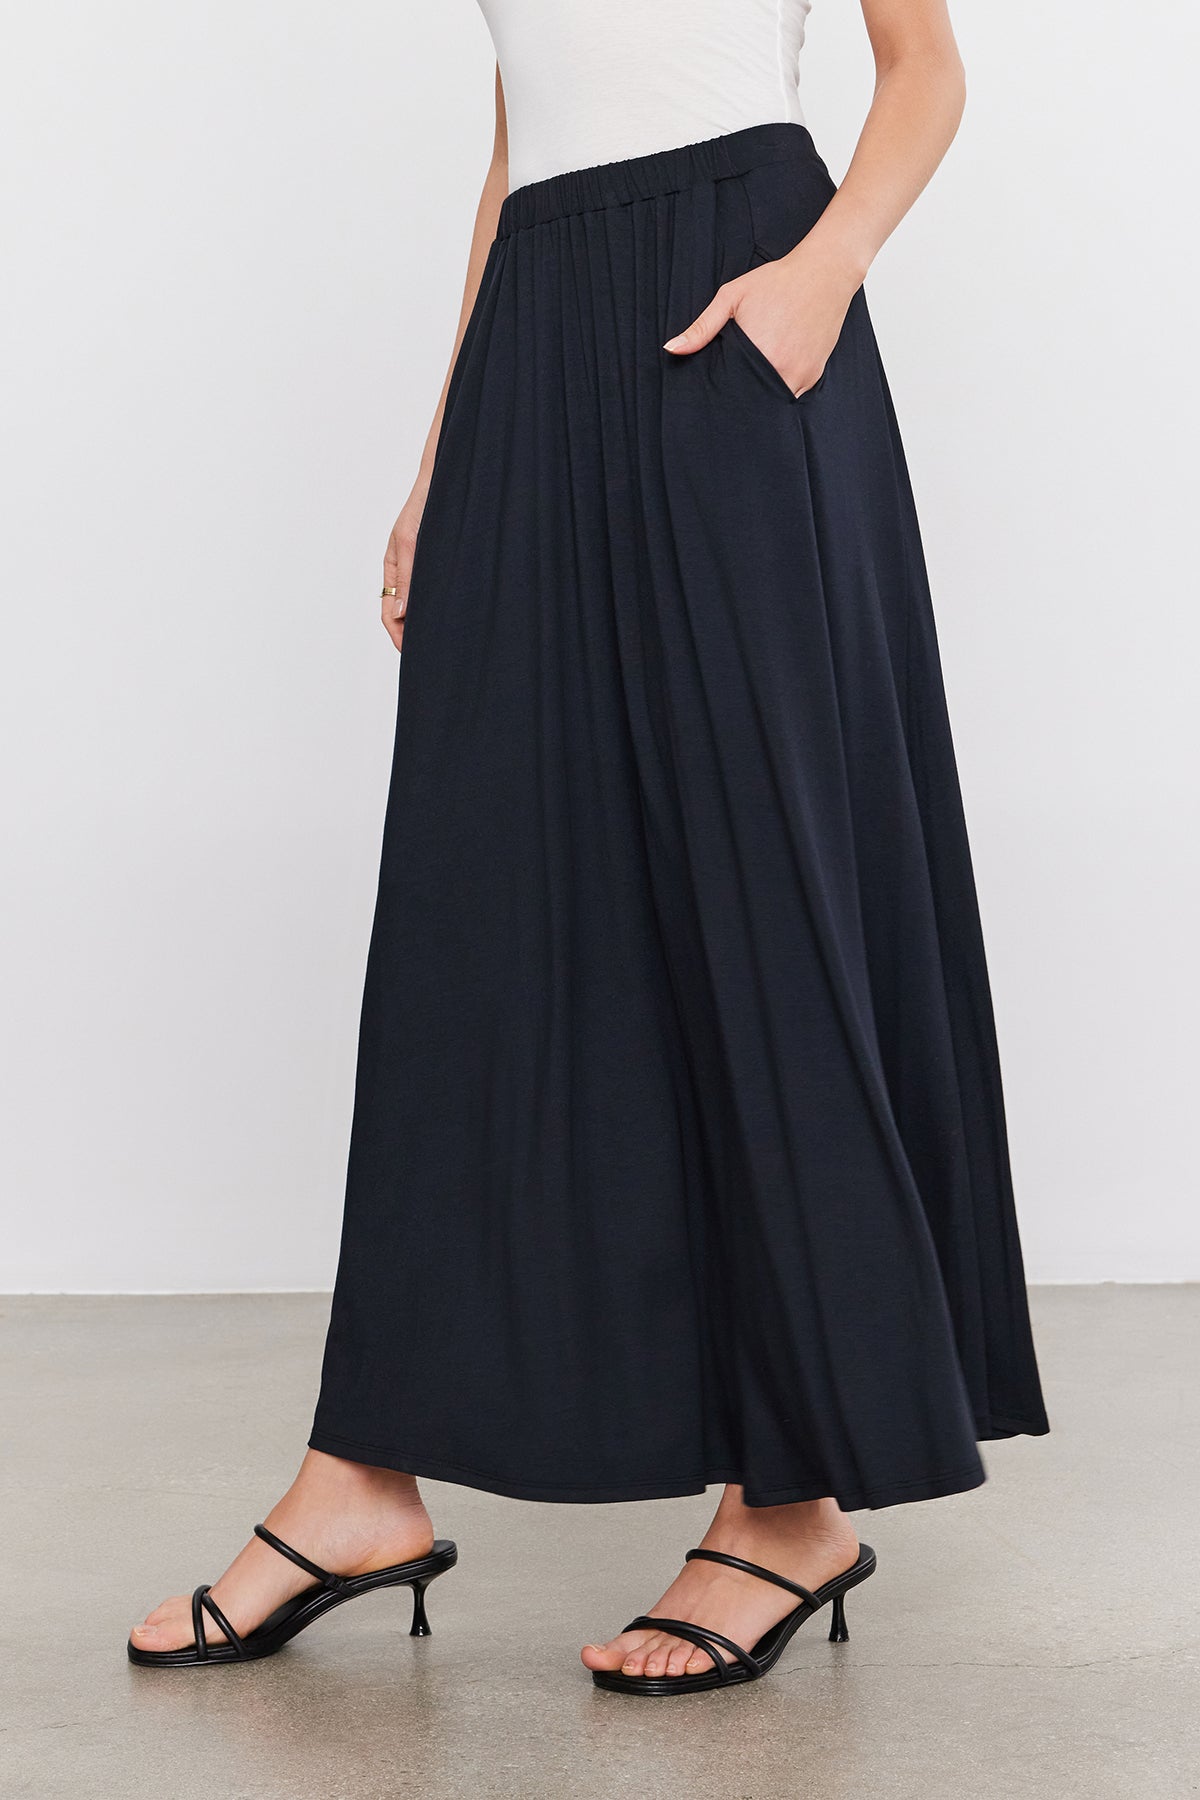 A woman wearing a navy pleated MALAYA MAXI SKIRT by Velvet by Graham & Spencer.-35660950208705